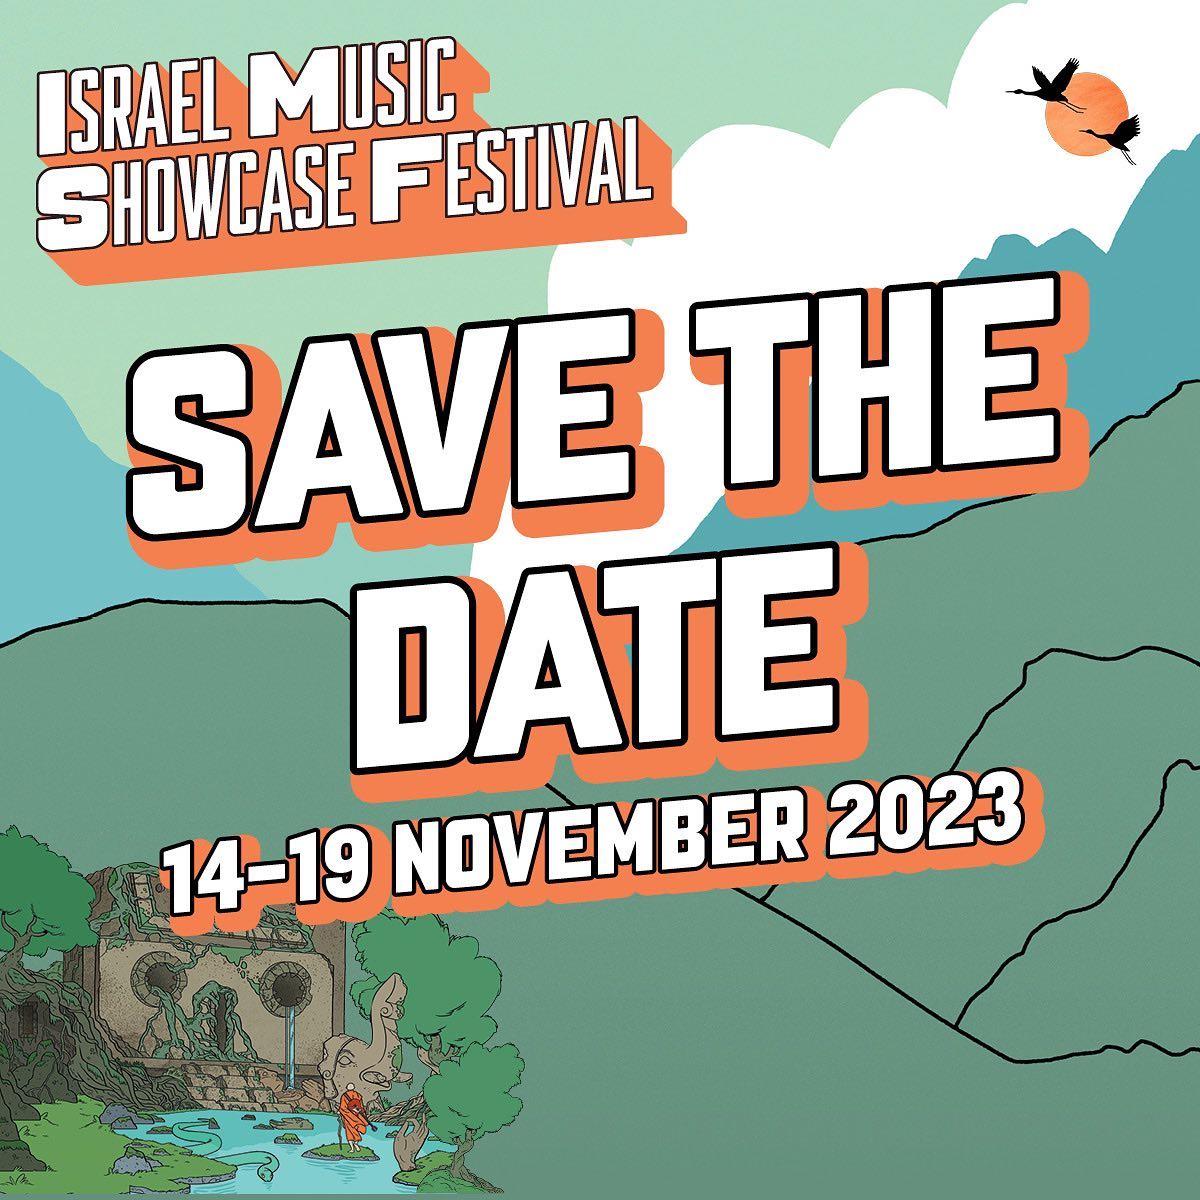 Israel Music Showcase Festival Festival Lineup, Dates and Location